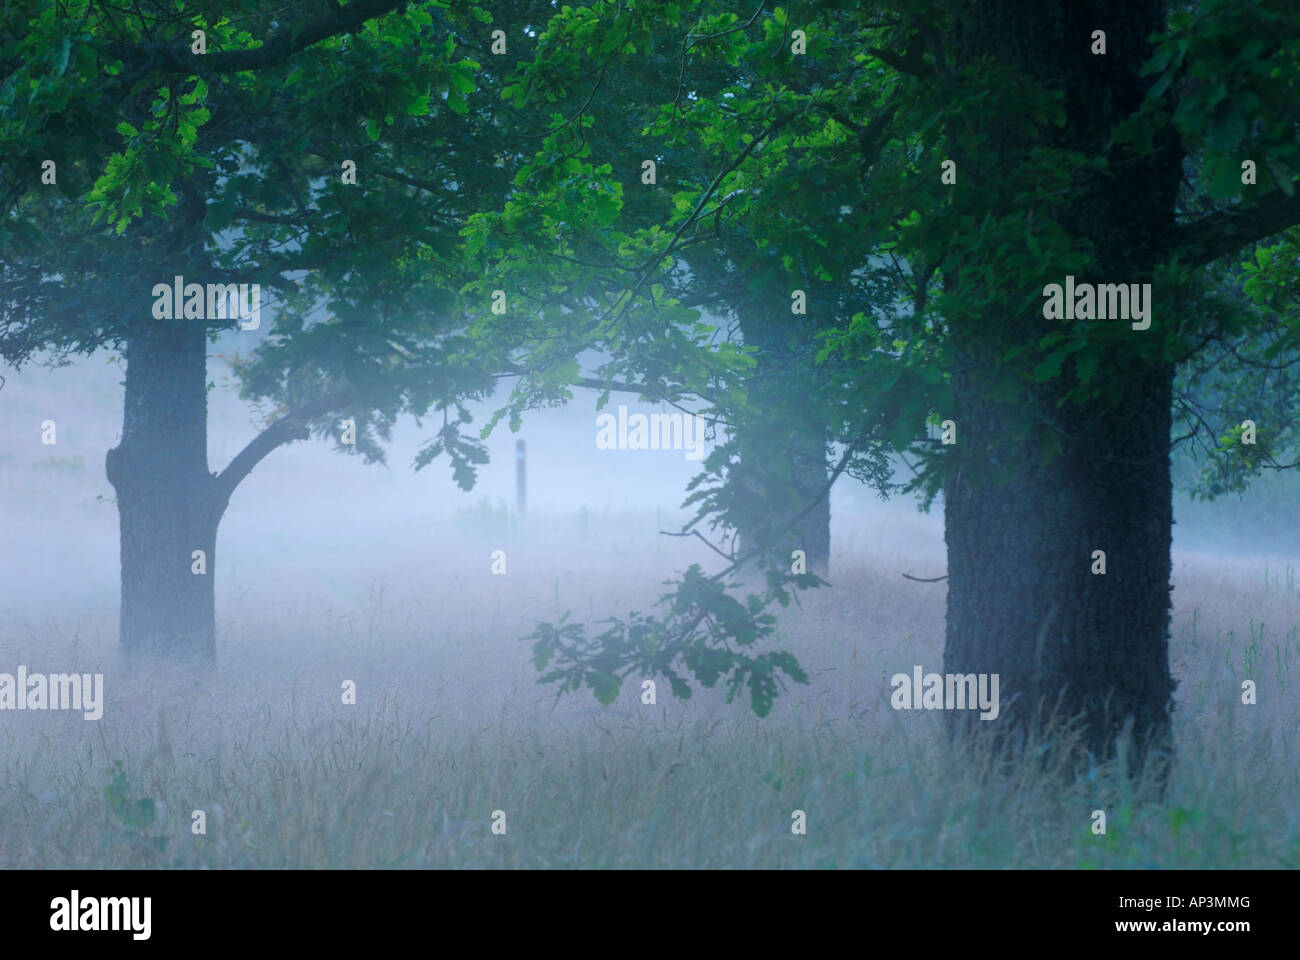 Trees standing in a misty landscape Stock Photo